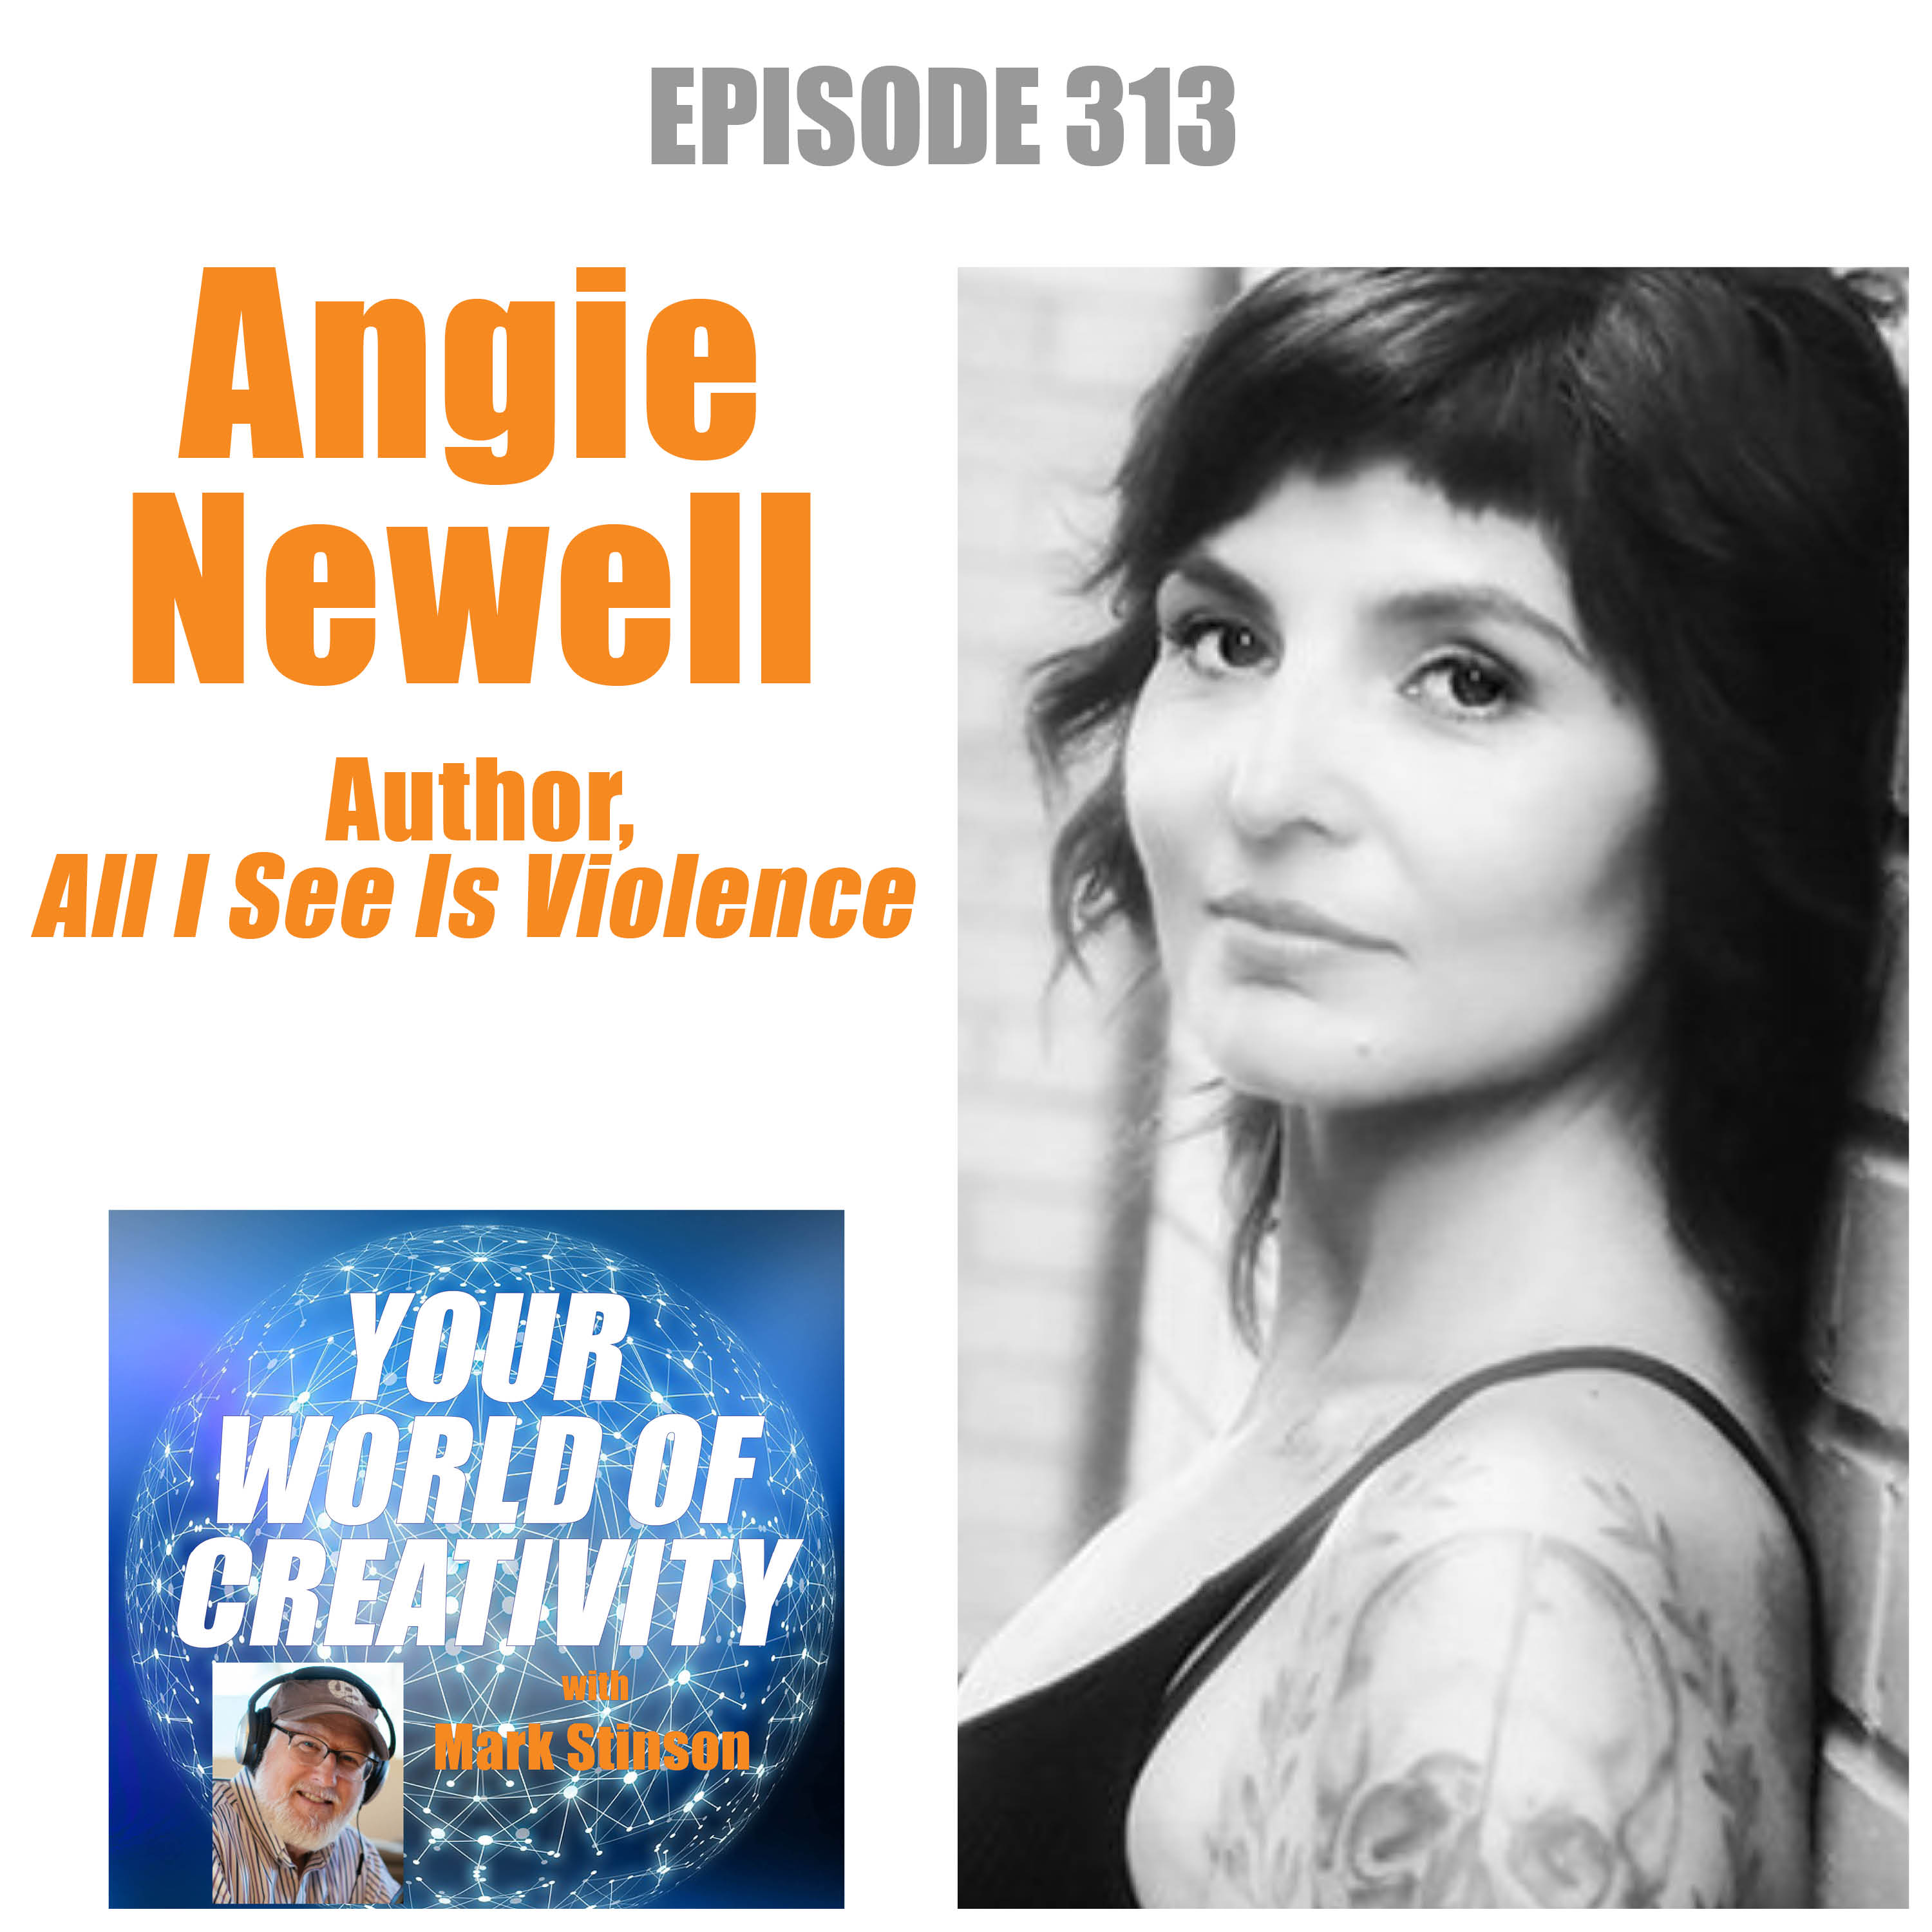 Angie Newell, author “All I See is Violence”